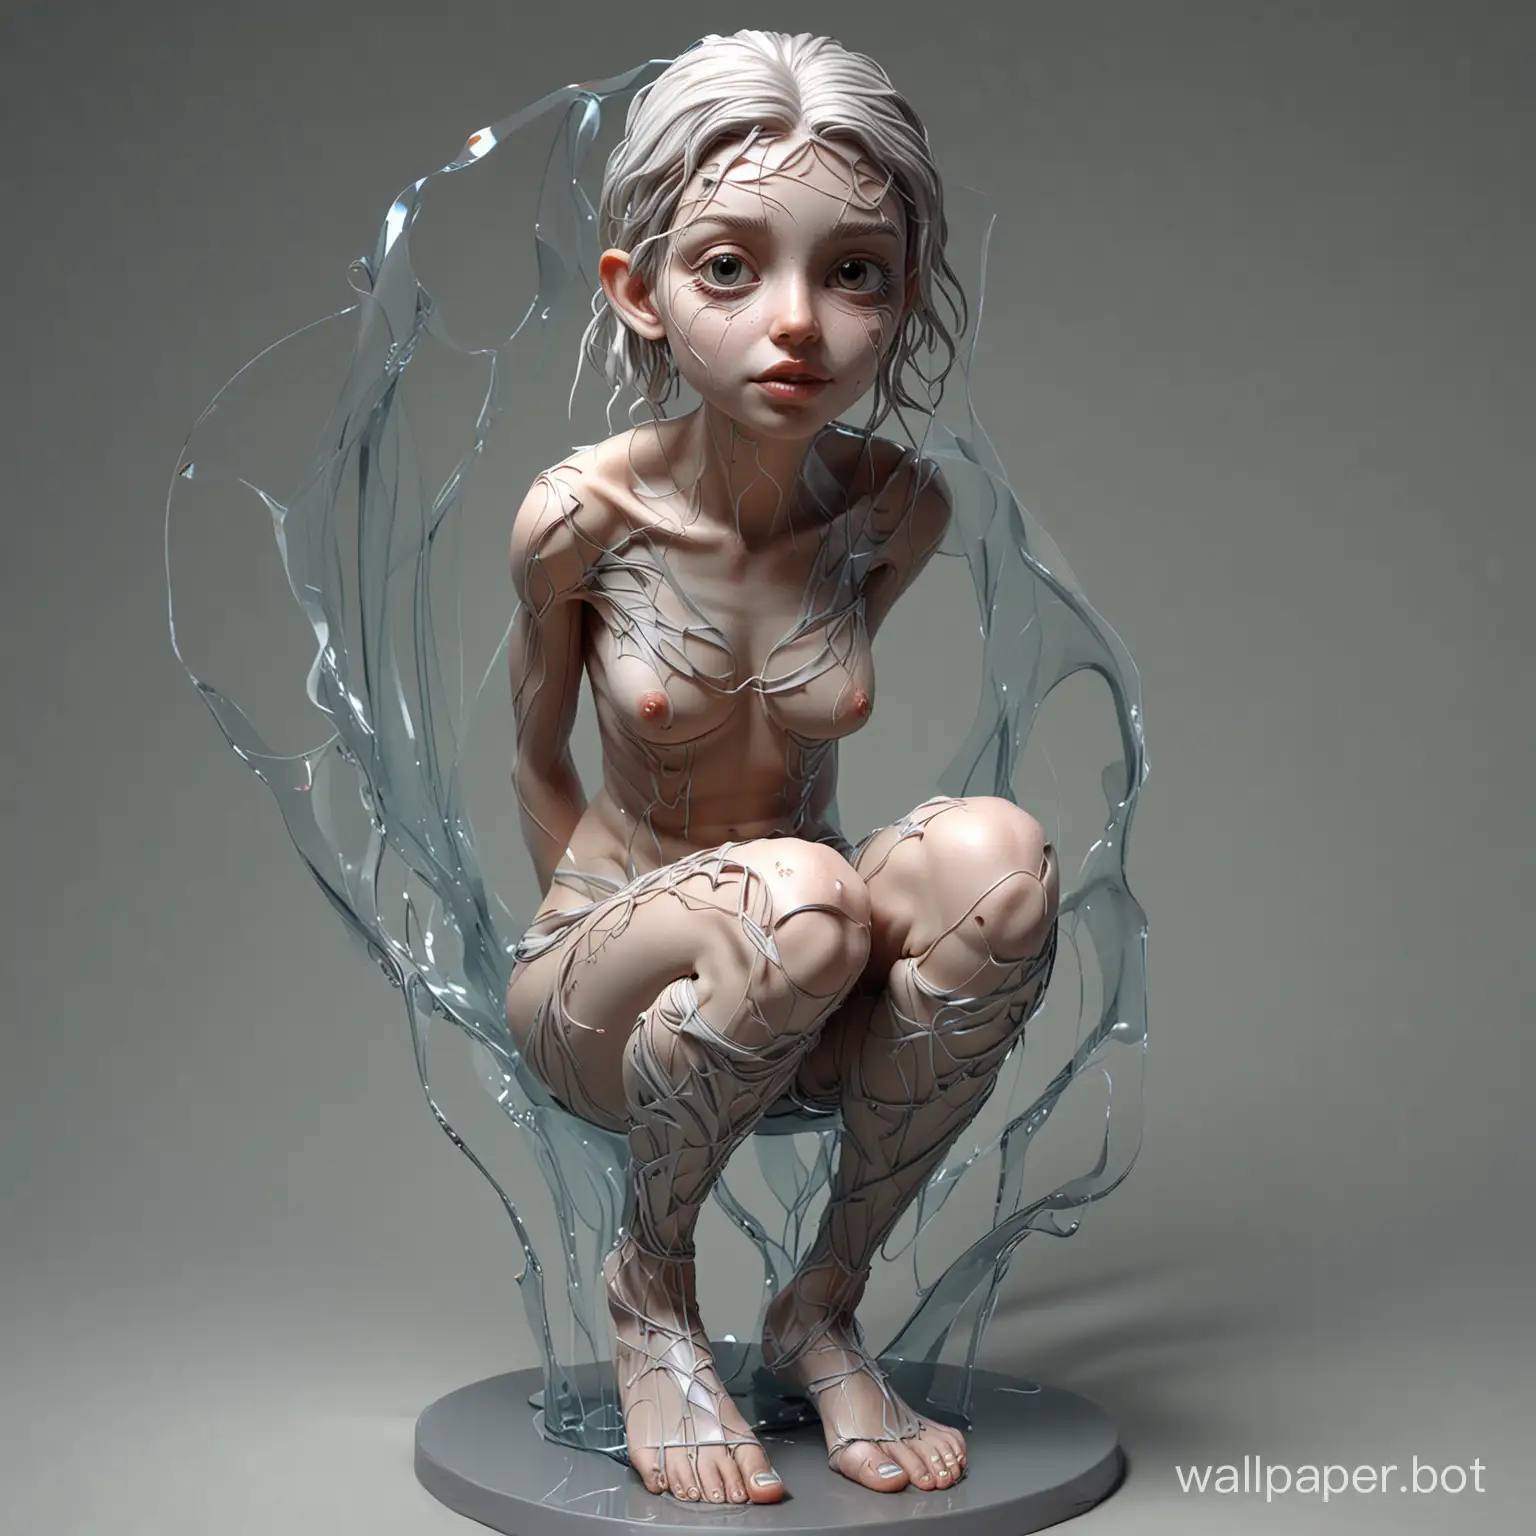 Surreal-3D-Art-Enigmatic-Woman-Trapped-in-Liquid-with-Silver-Tattoos